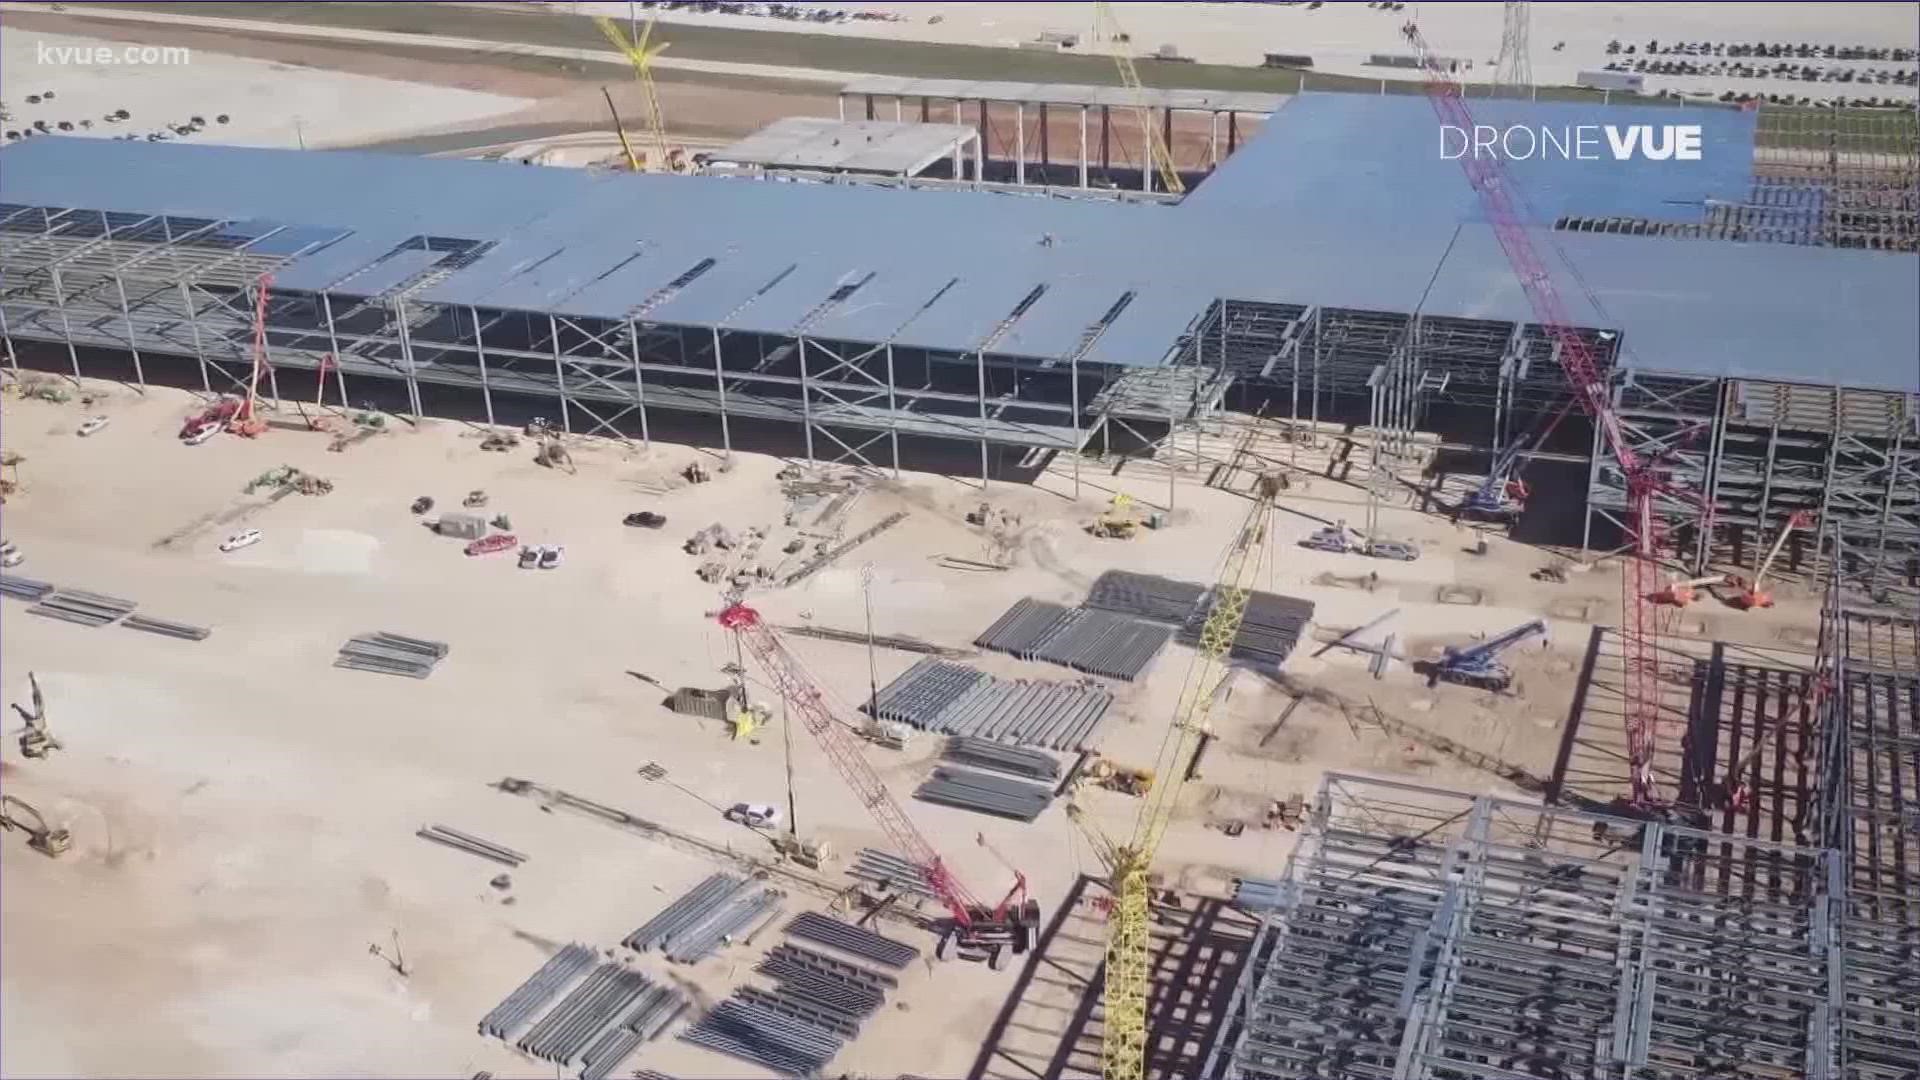 Tesla is hiring for over 300 jobs at its Austin Gigafactory, according to a report from the Austin Business Journal.